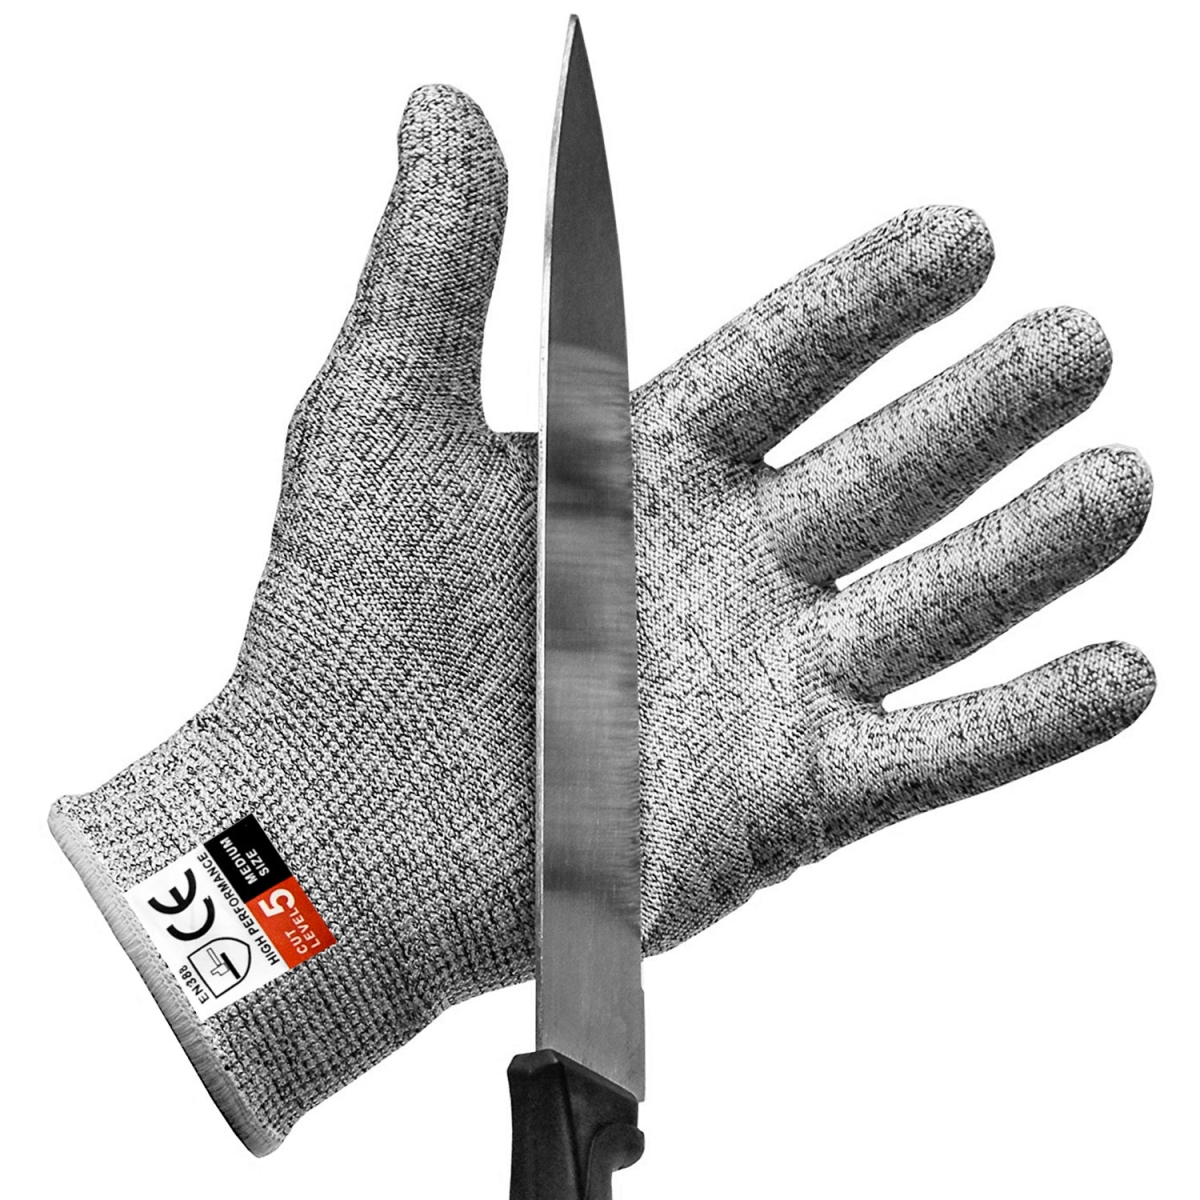 Picture of KapscoMoto HOM-004 Cut Resistant Gloves Food Grade Level 5 Protection Safety Kitchen Cuts Gloves - Grey